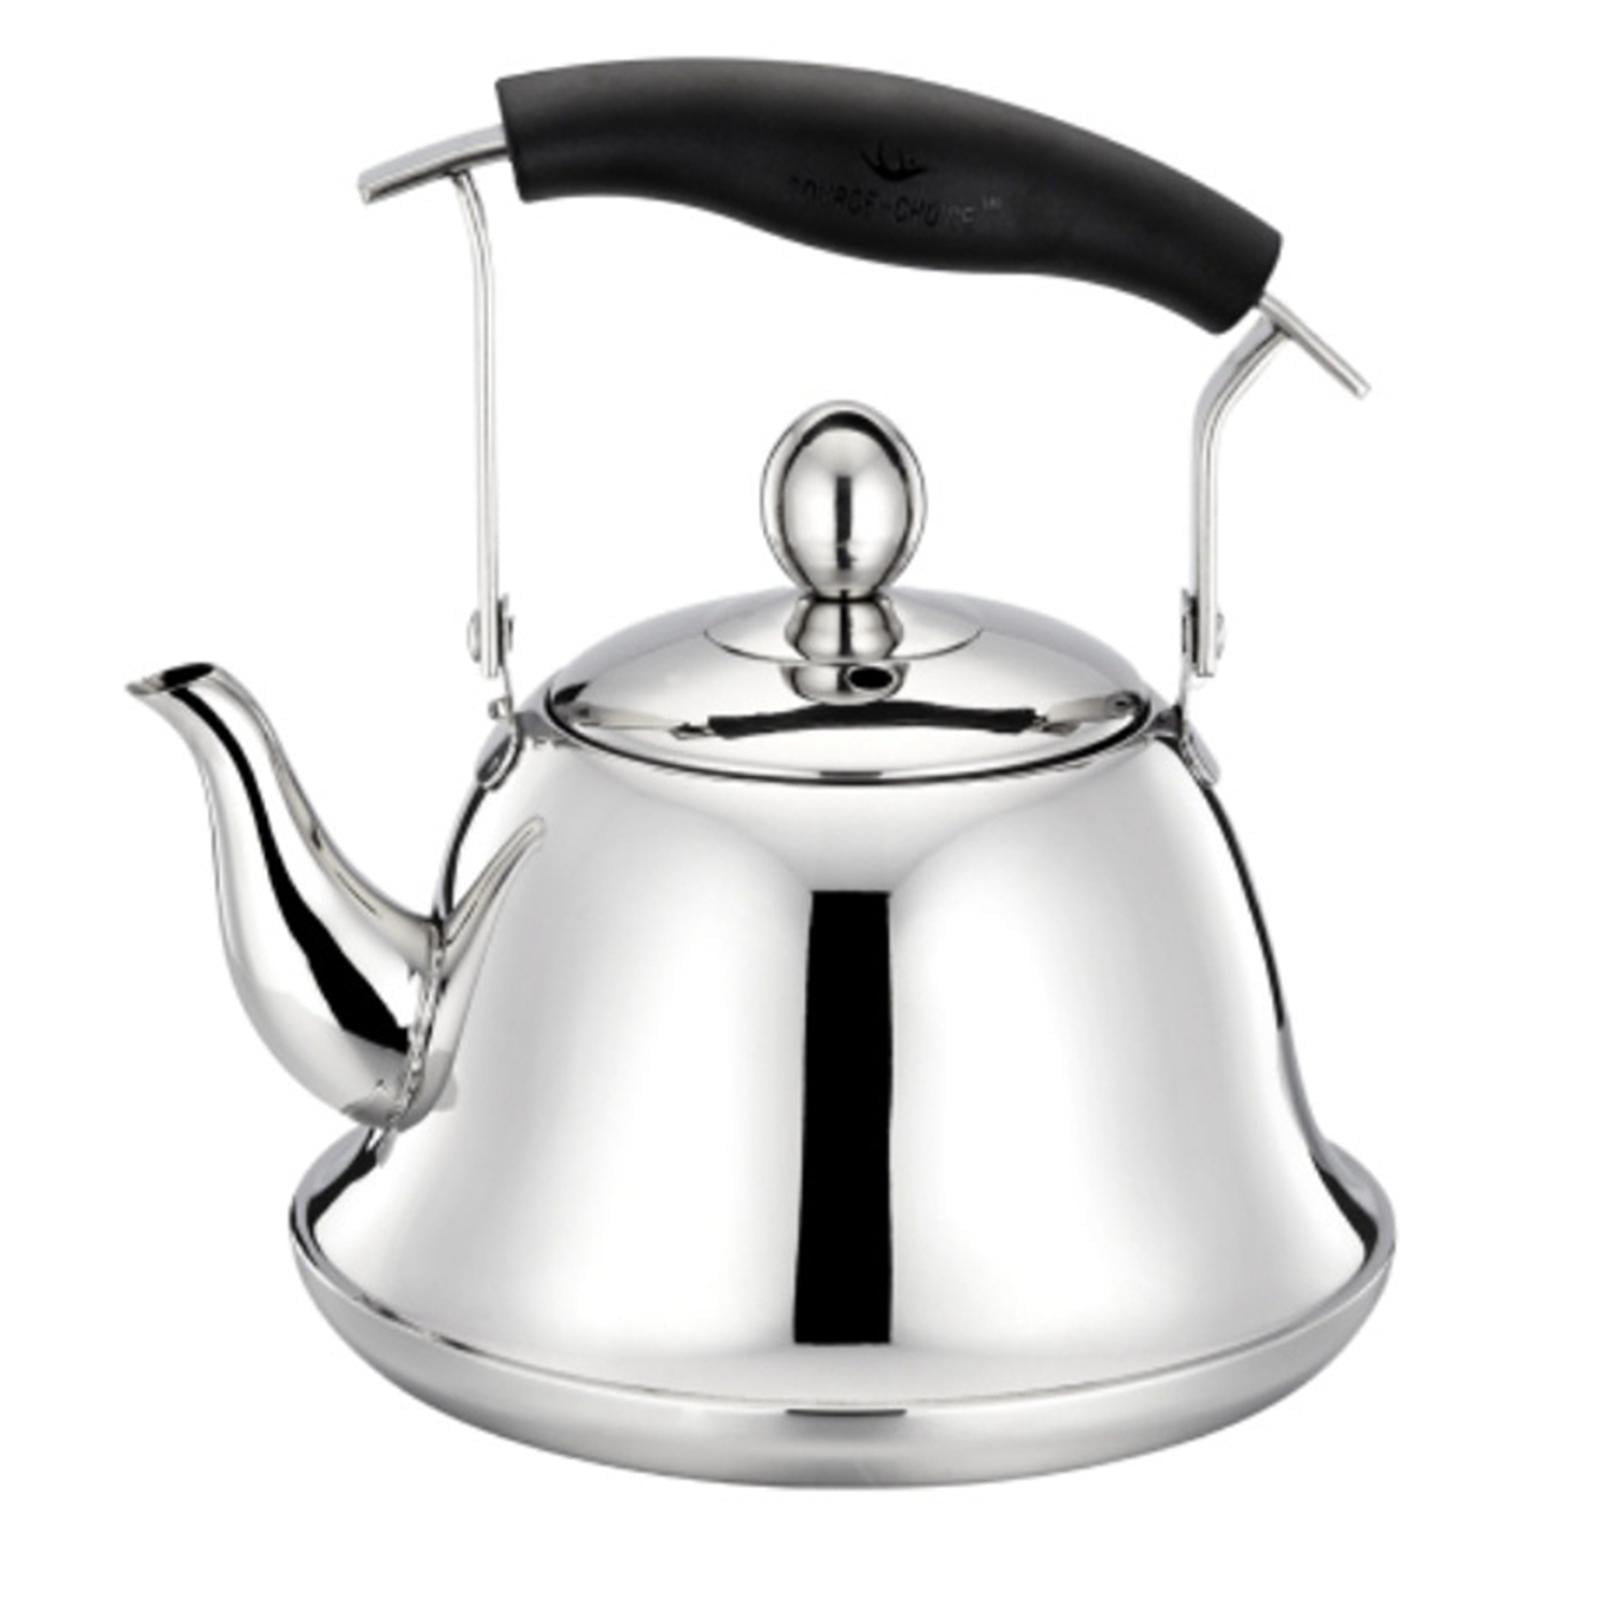 Everyday Solutions Whistling Tea Kettle; Vine Collection - Brushed  Stainless Steel Kettle w/Ergonomic Heat Resistant Handle & Leaf Design -  for Gas